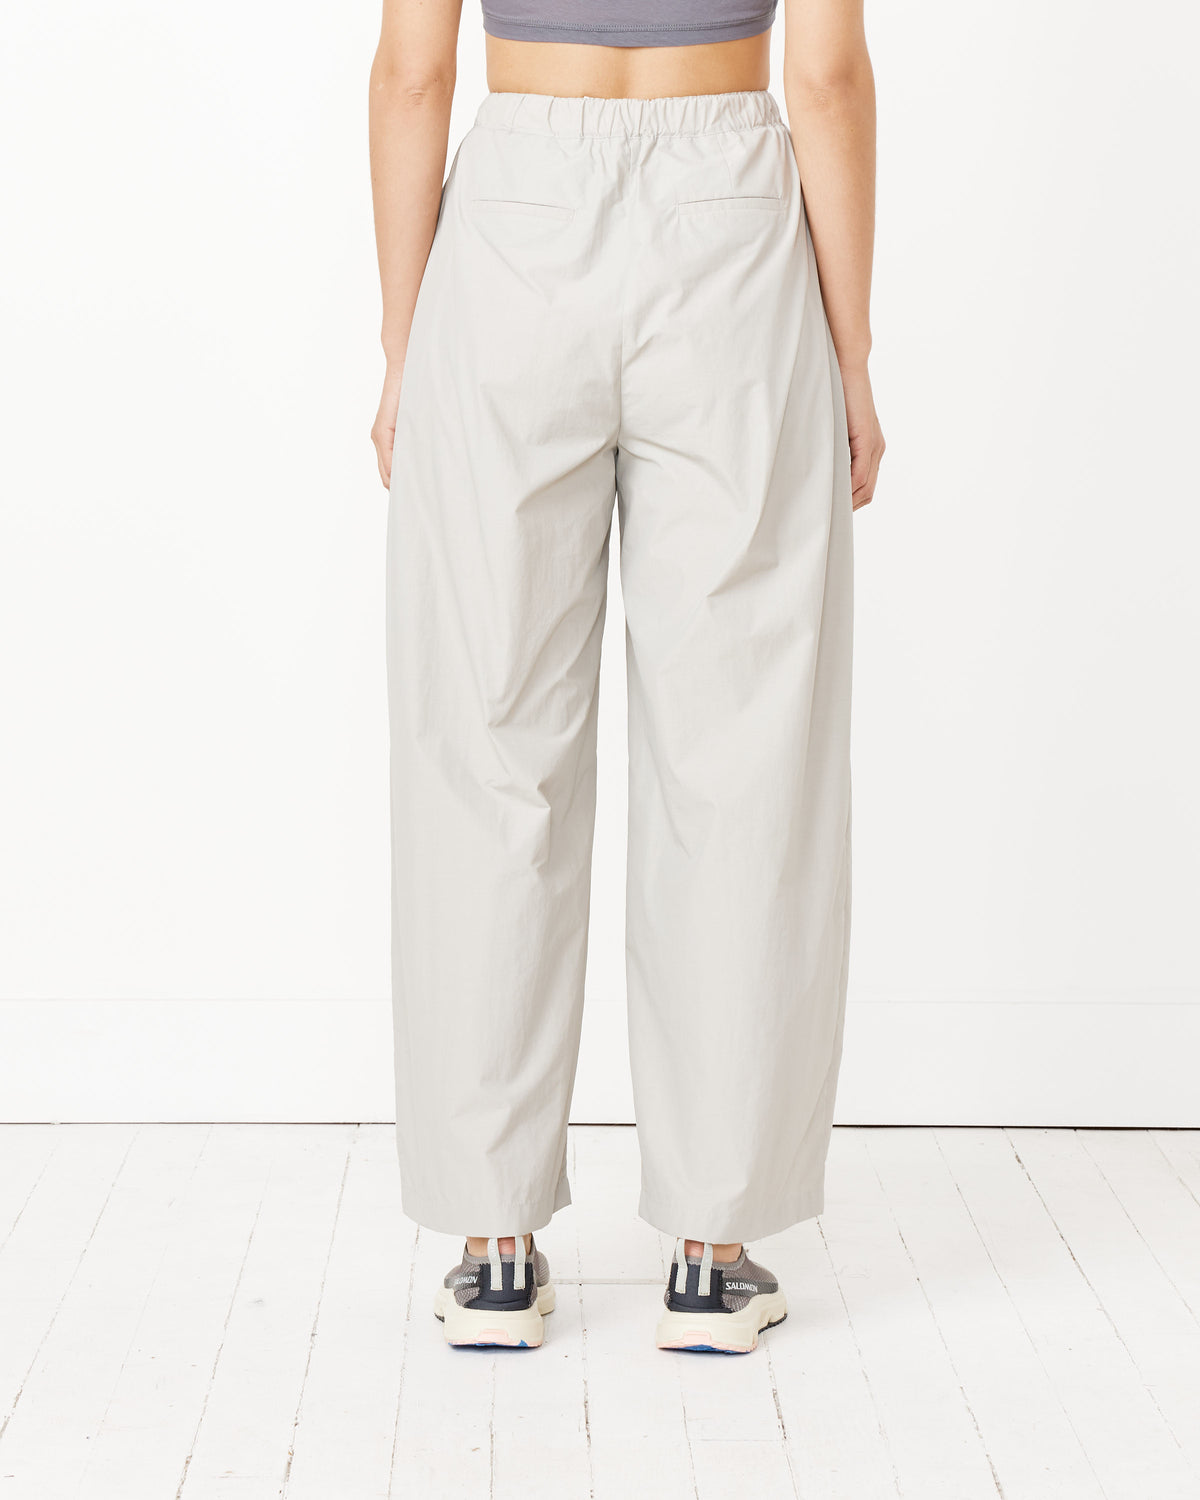 Shop Three Tuck Banding Pants Amomento online with the lowest